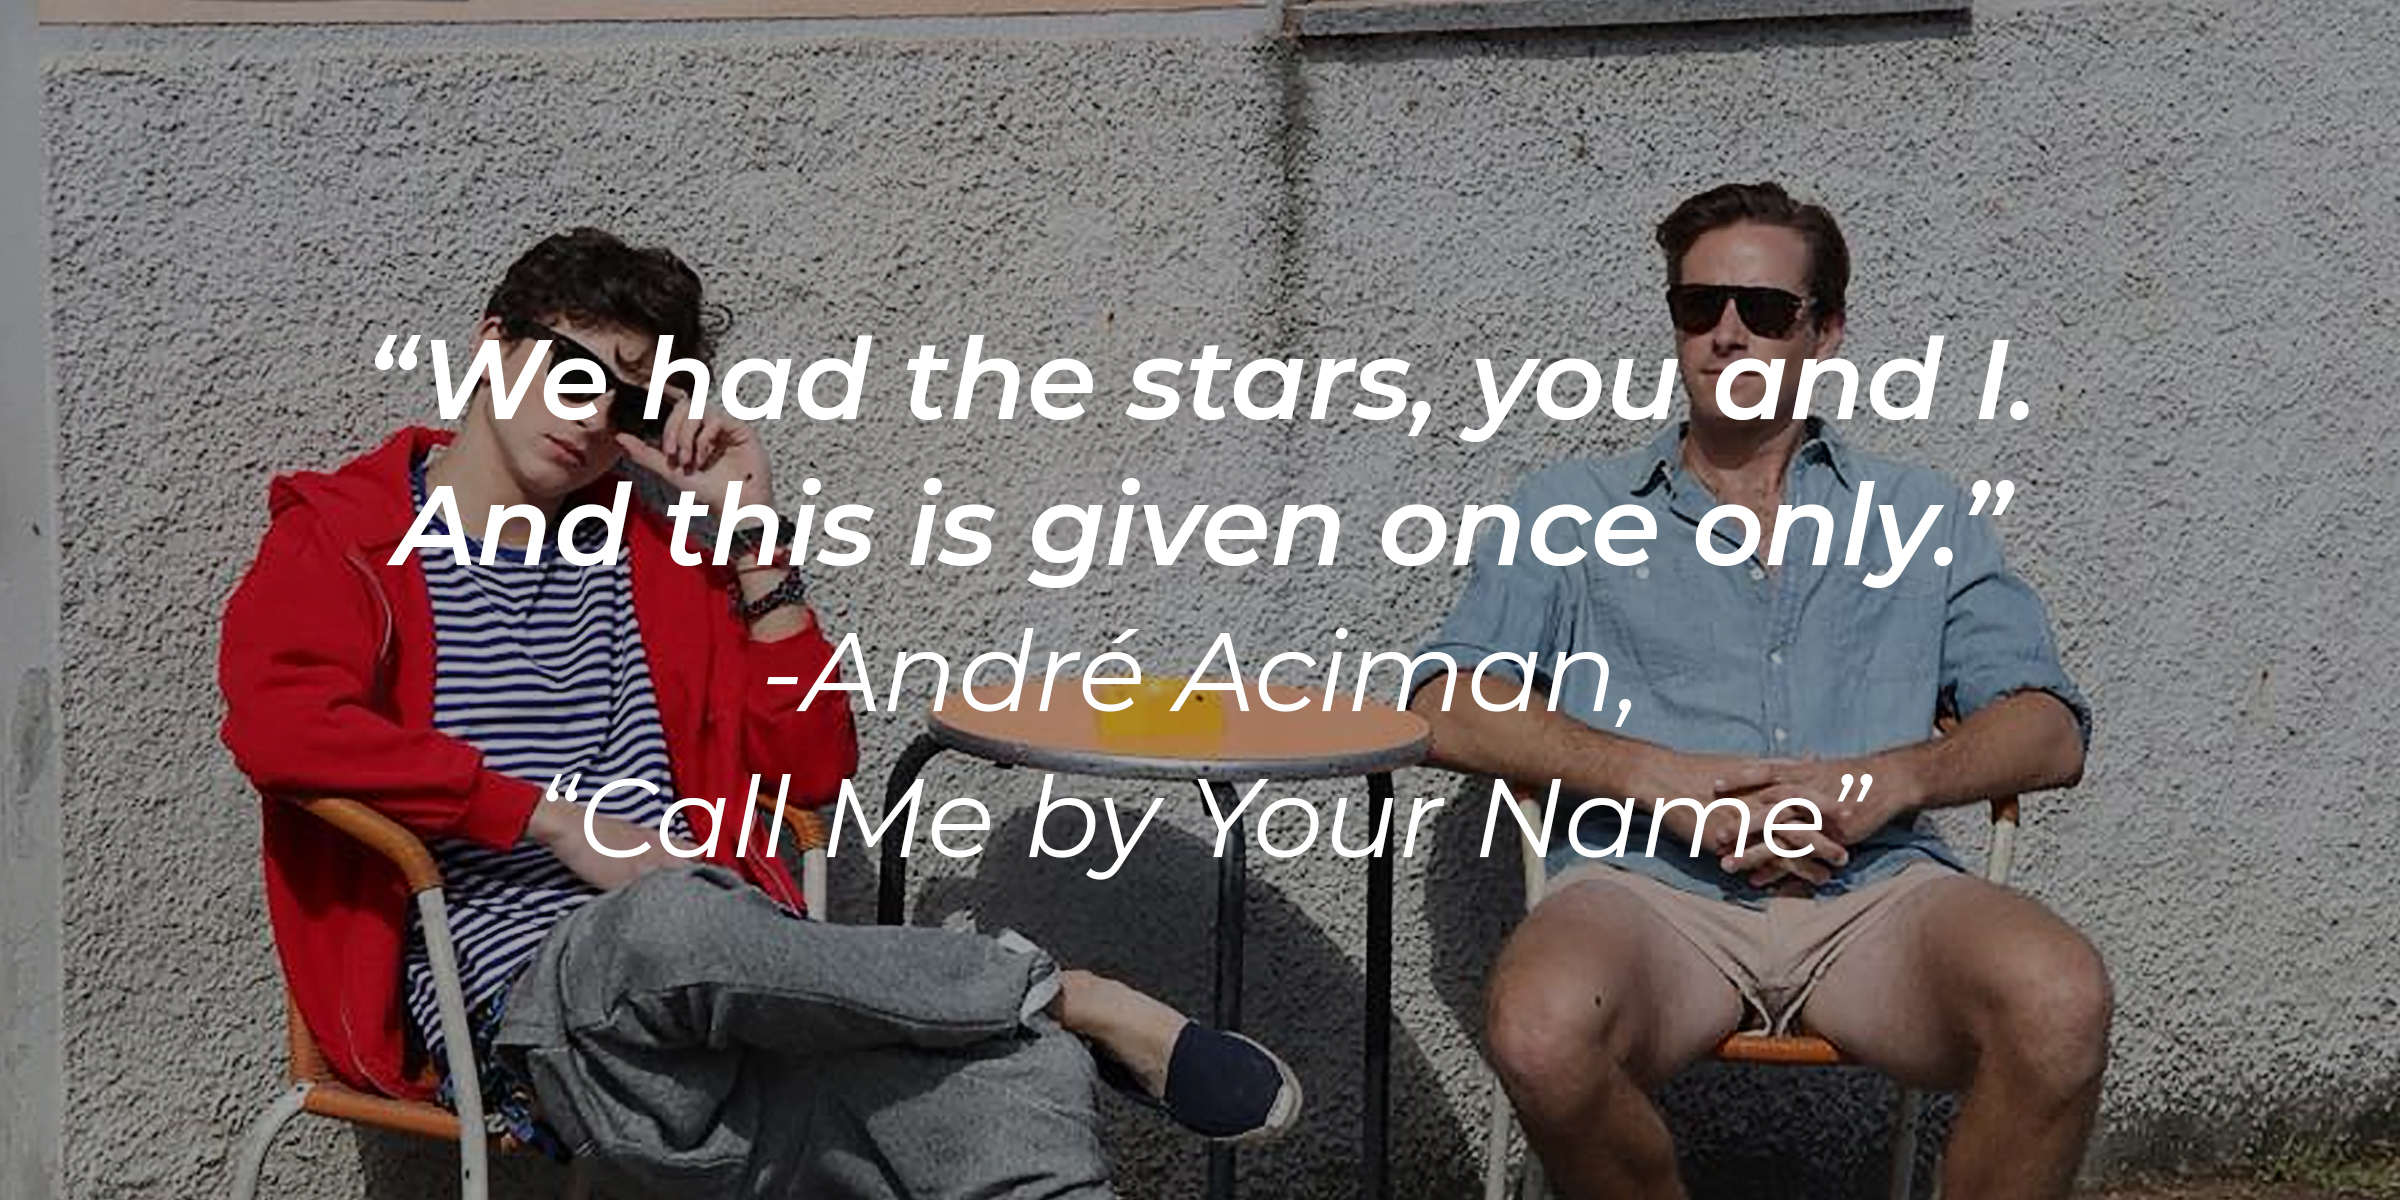 Characters Elio and Oliver from the film “Call Me By Your Name,” with a quote by the author, André Aciman, from the book it’s based on: “We had the stars, you and I. And this is given once only.” | Source: Facebook.com/CallMeByYourNameFilm